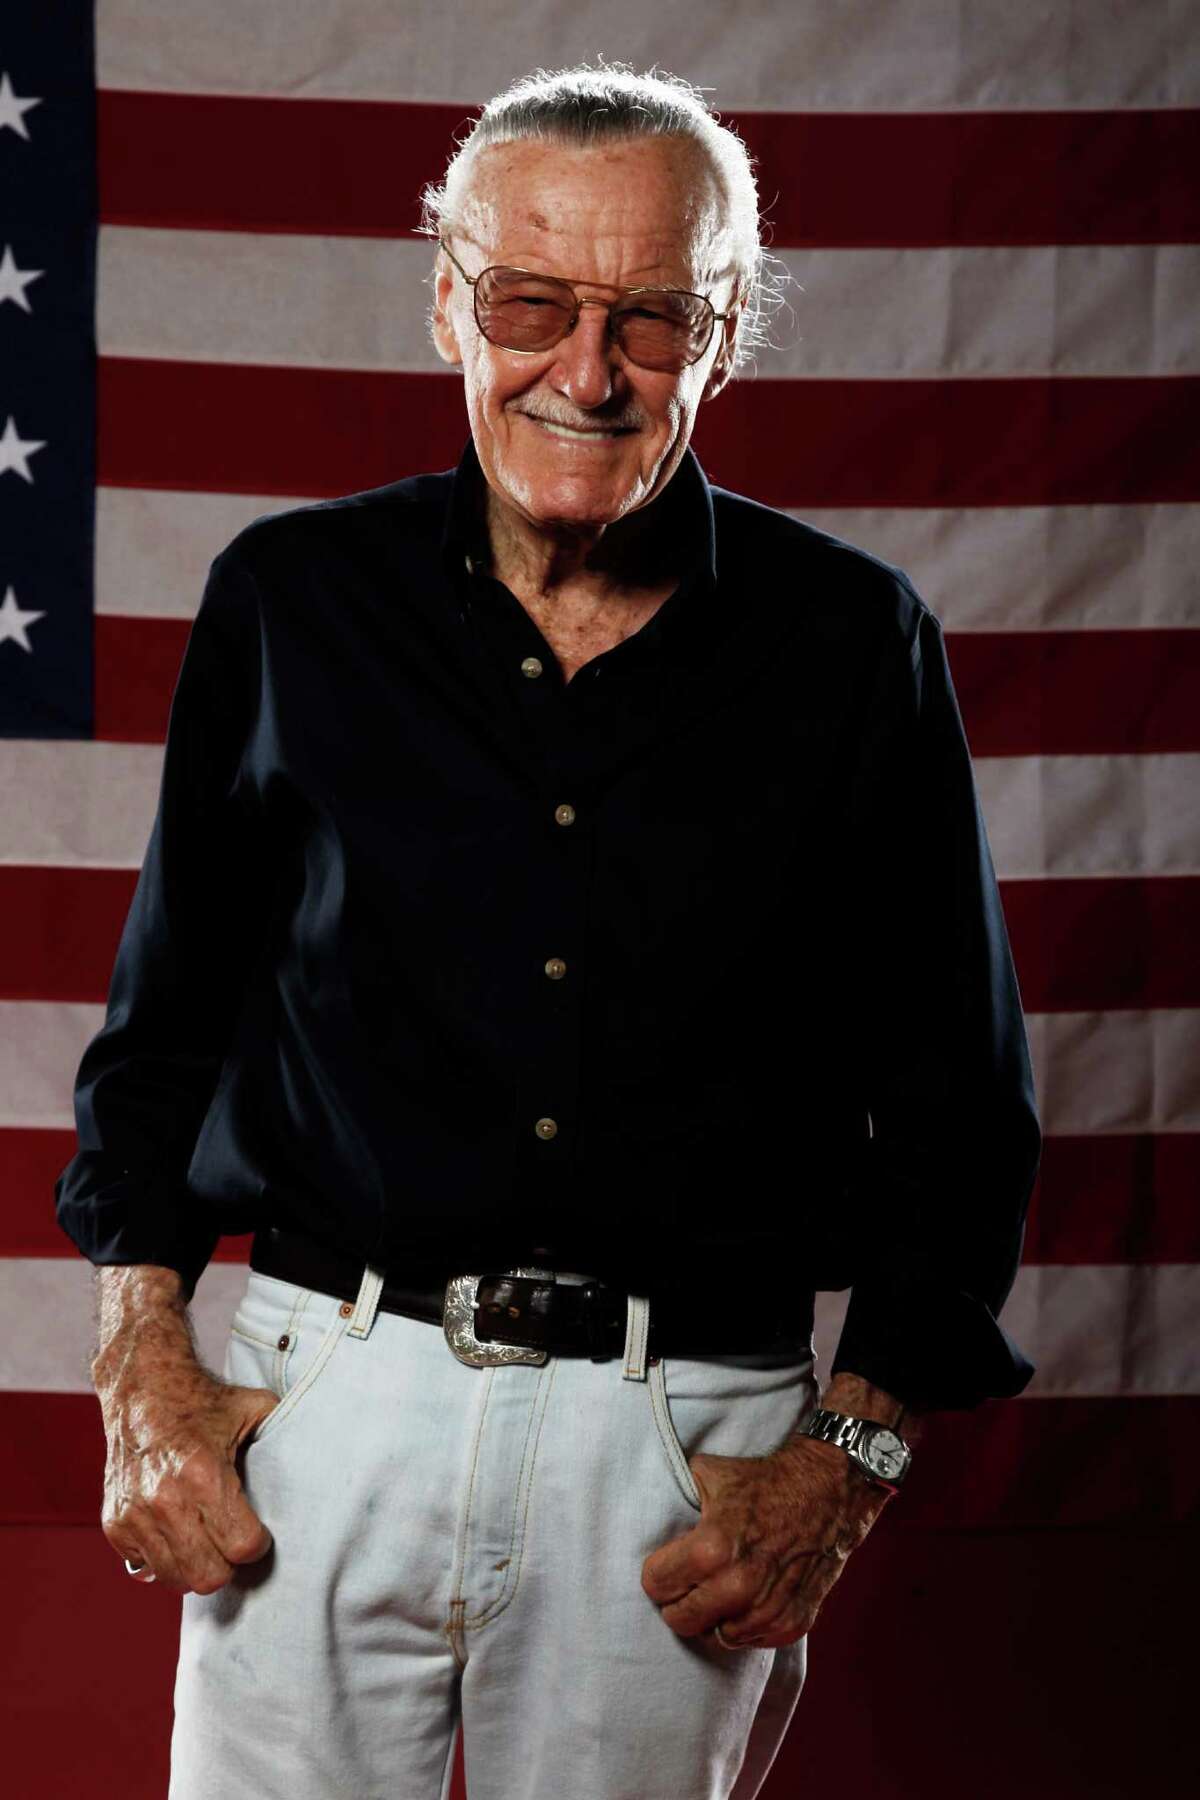 In this July 21, 2011 file photo, comic book creator and founder of POW! Entertainment, Stan Lee, poses for a portrait at the LMT Music Lodge during Comic Con in San Diego. (AP Photo/Matt Sayles, file)